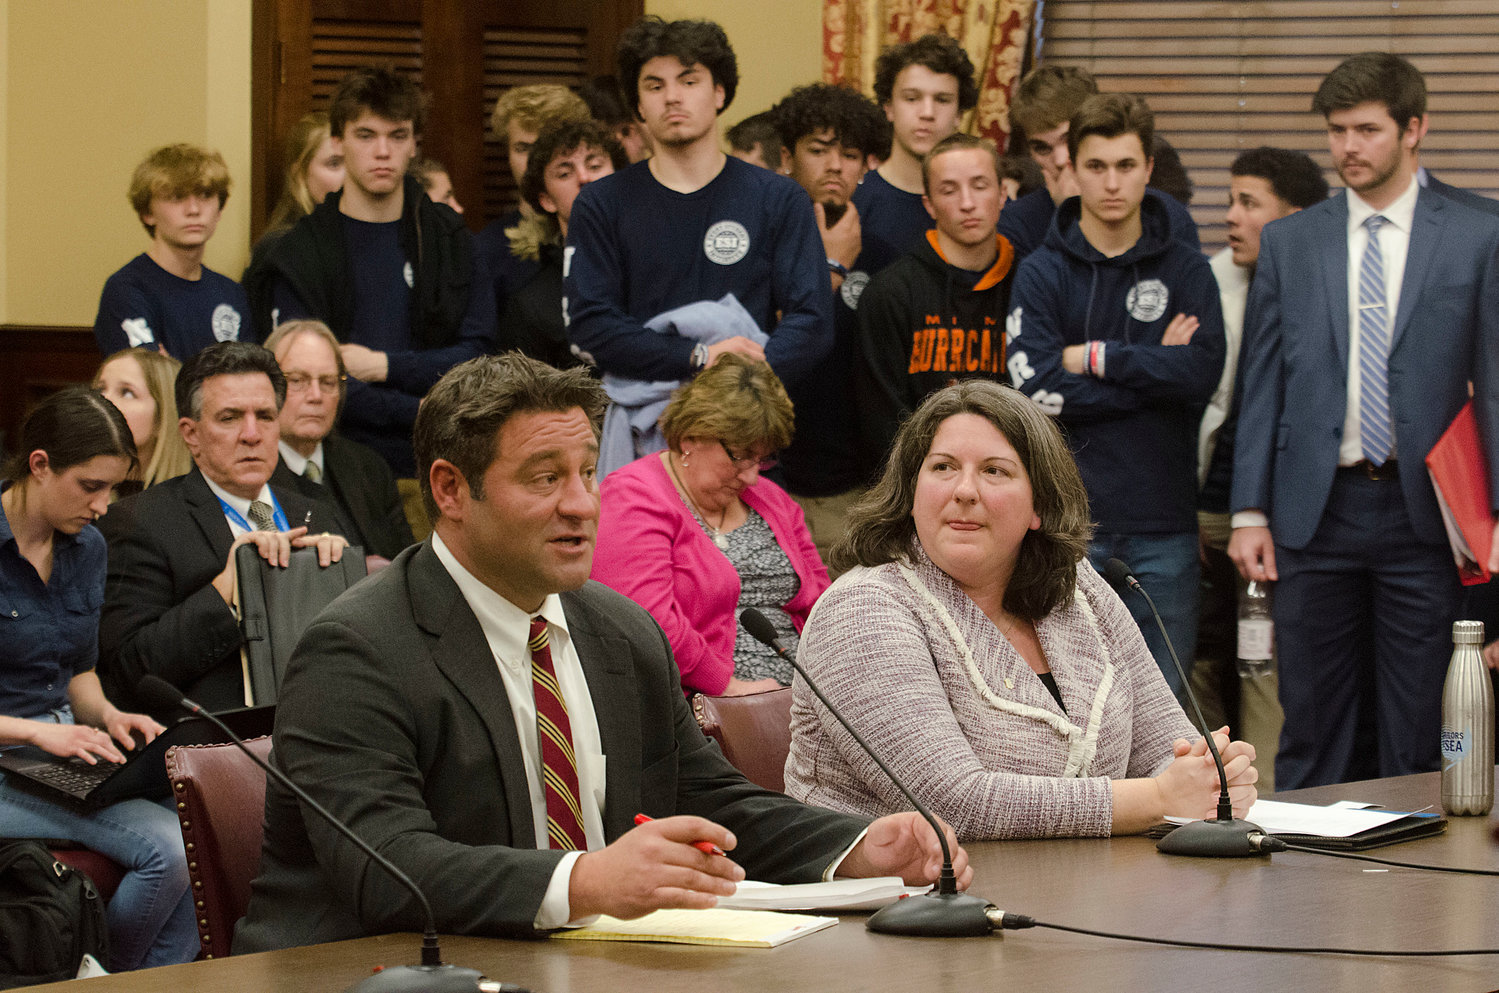 Attorney Kevin Vendituoli testifies in favor of the bill as Sen. Dawn Euer, the measure’s main sponsor, looks on. Members of Every Student Initiative crowd a corner of the room behind them.